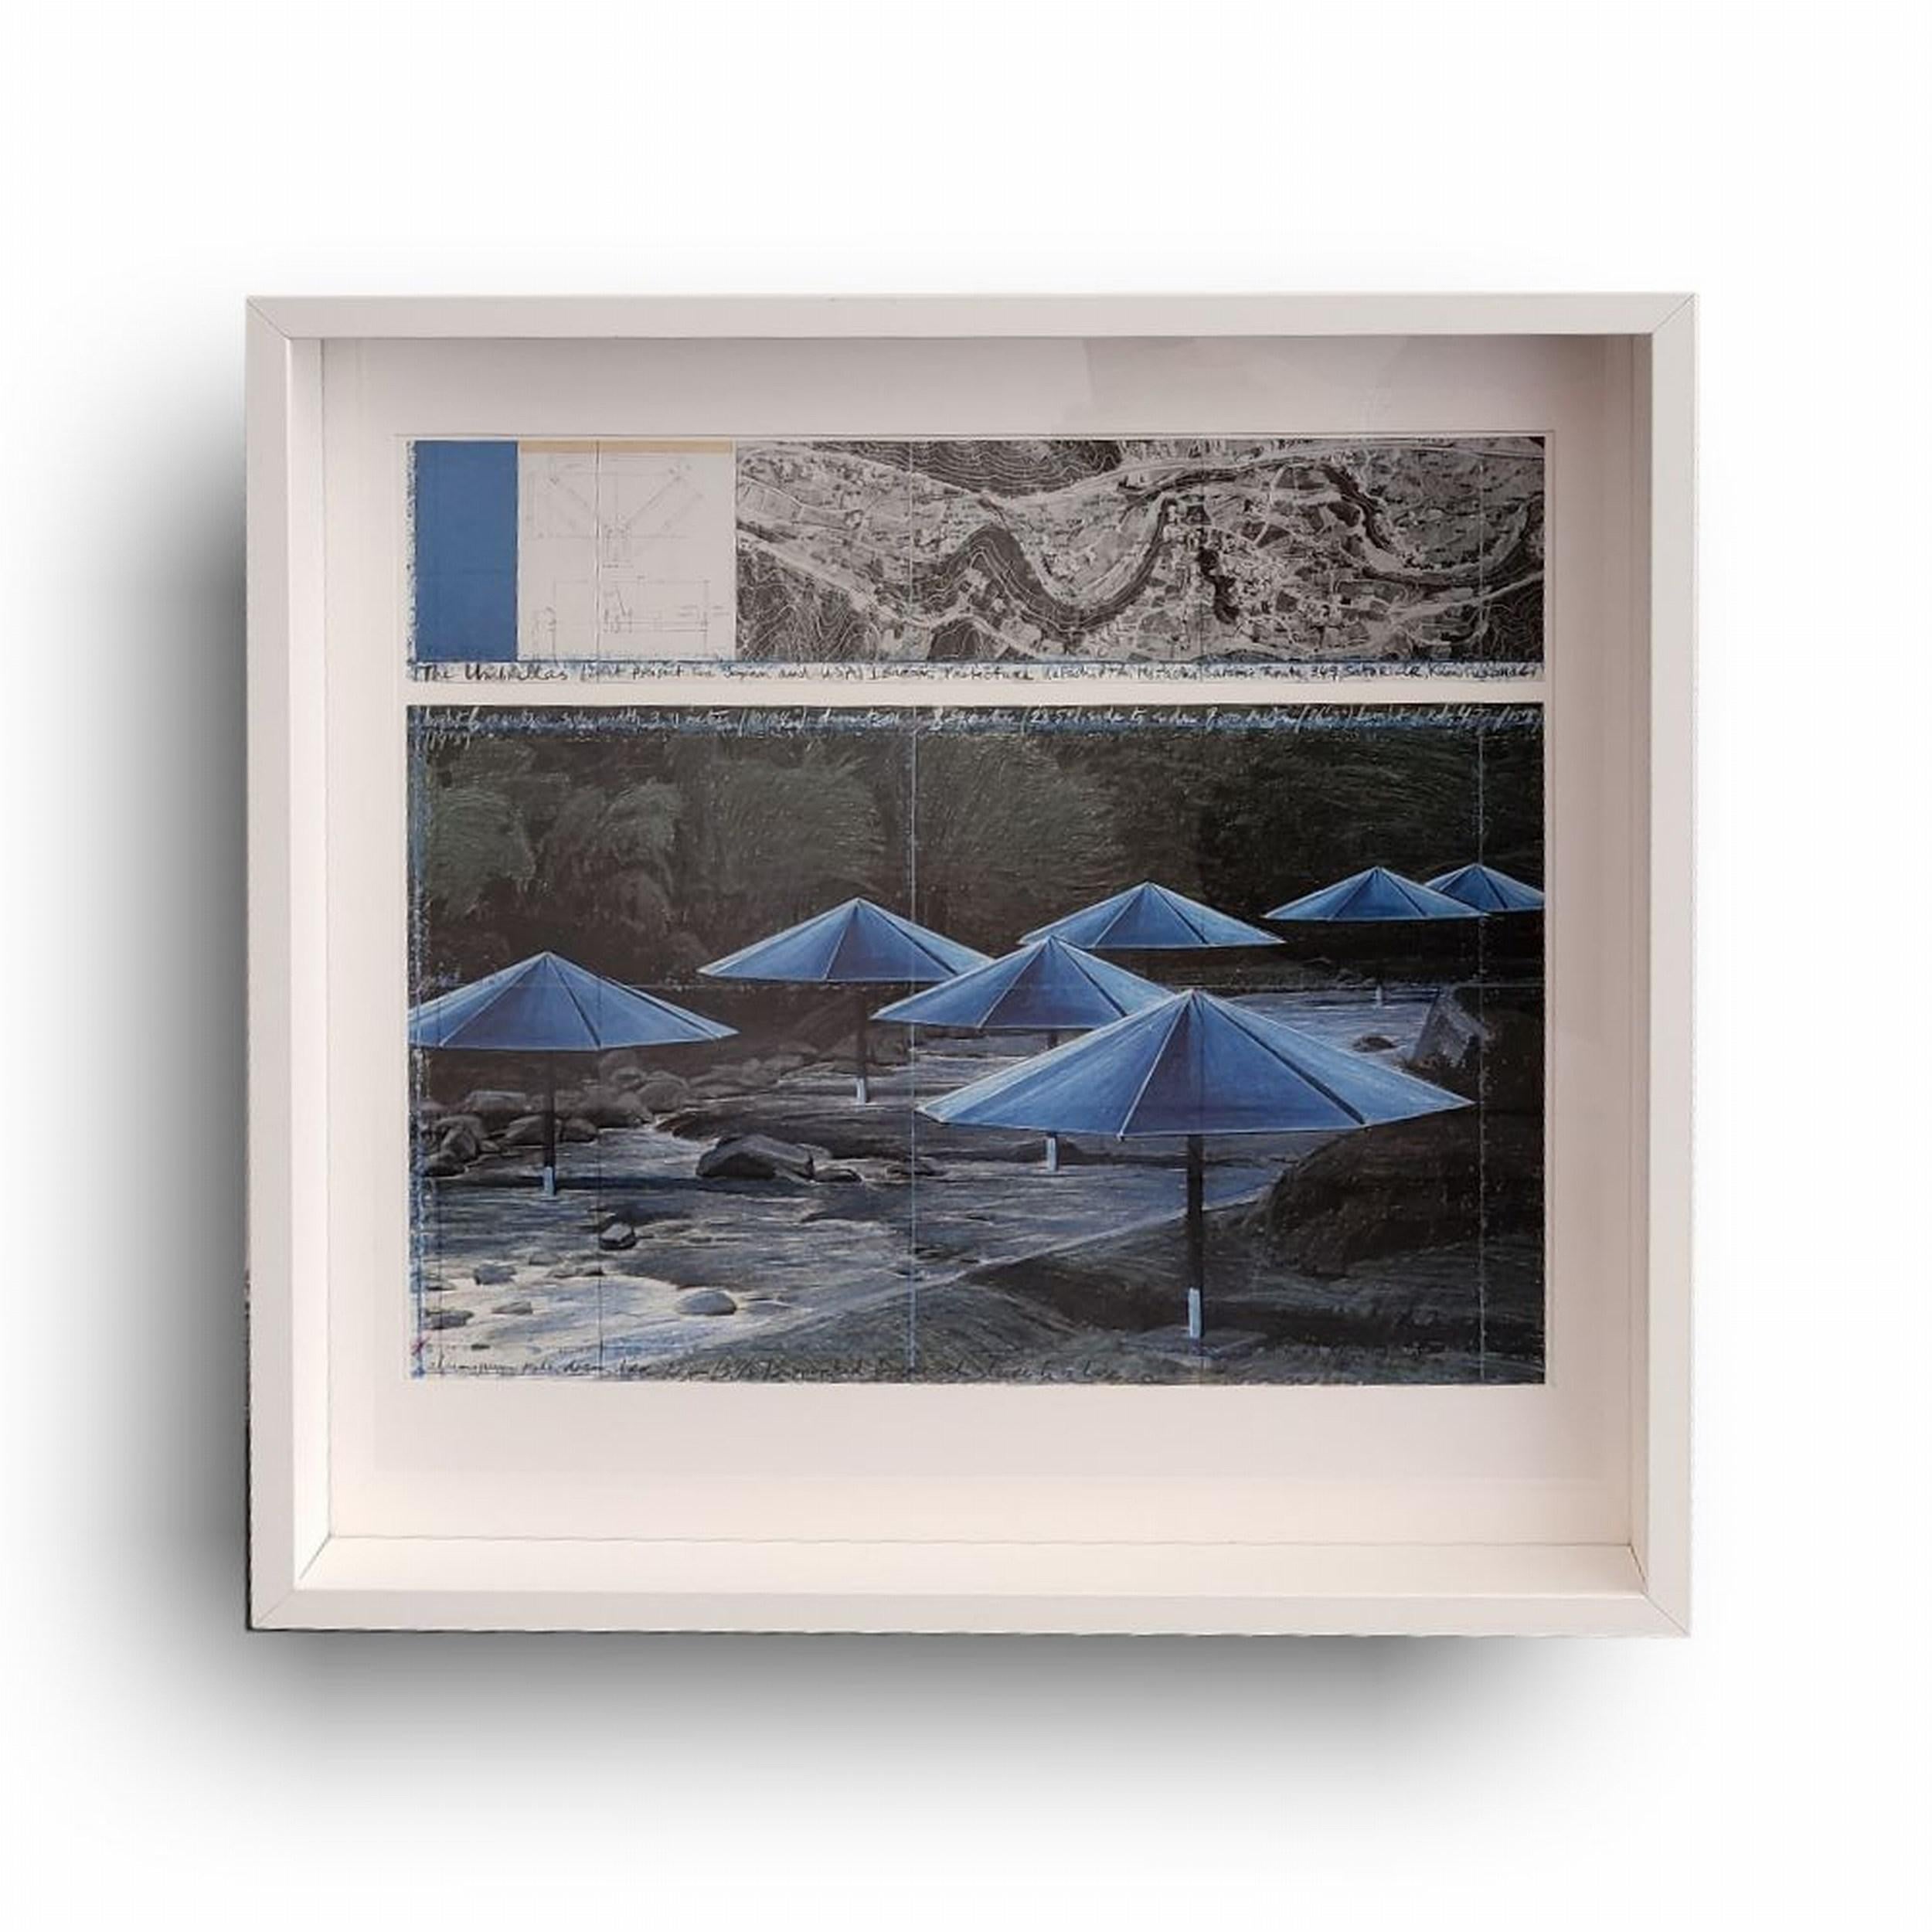 The Umbrellas (Blue) - Print by Christo and Jeanne-Claude